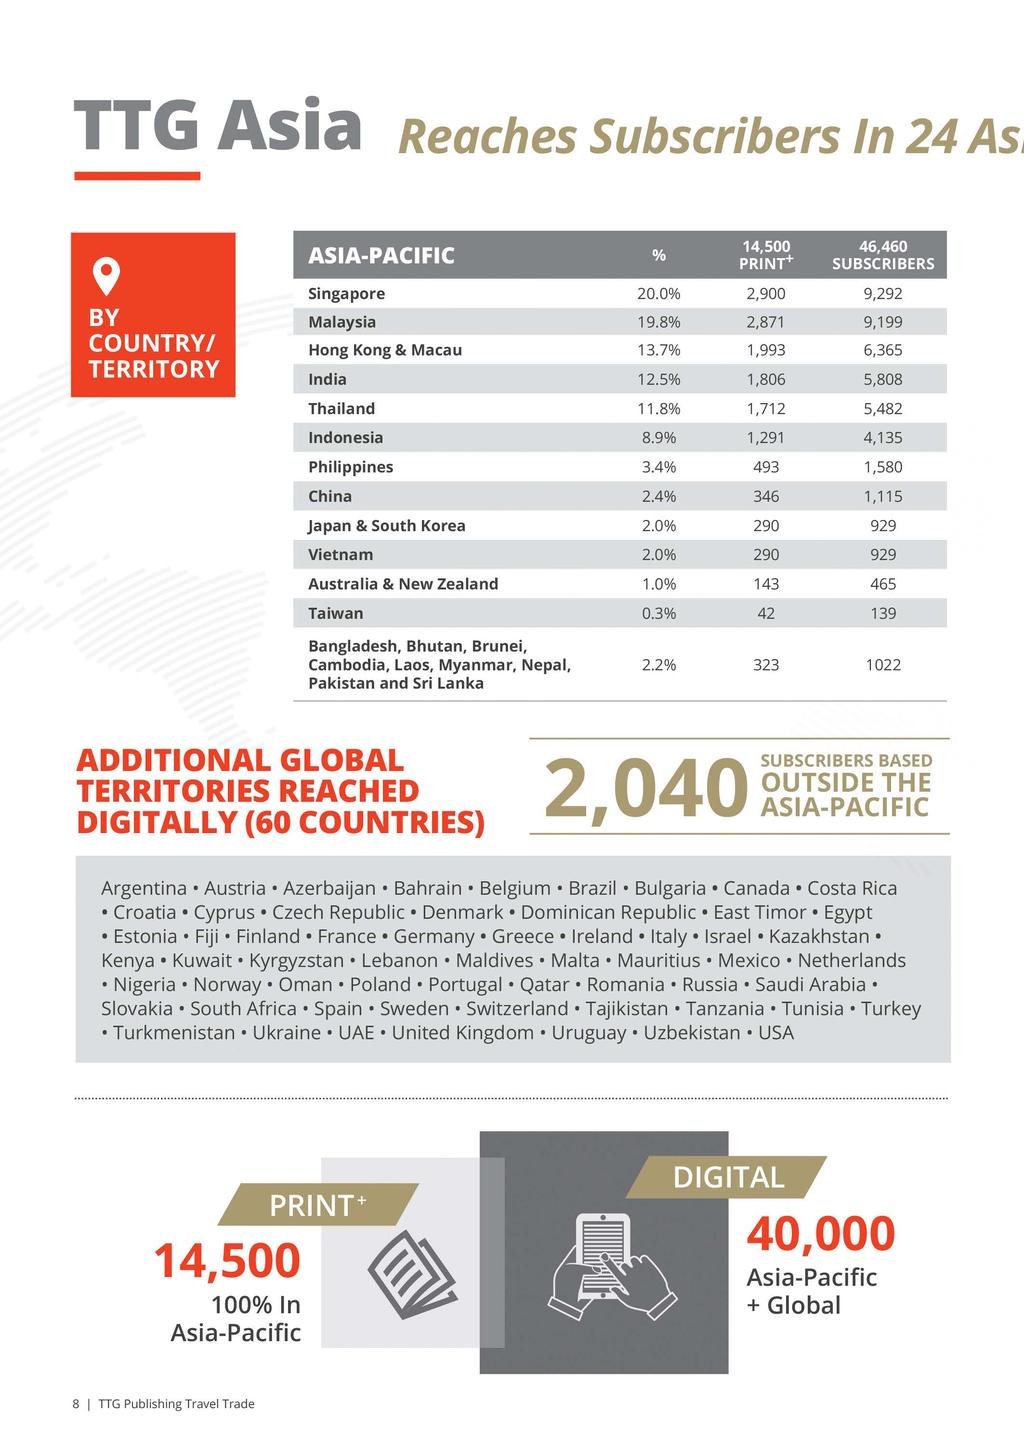 TTG Asia Reaches Subscribers In 24 Asj ia-pacific Countries and Beyond ASIA PACIFIC ADDITIONAL GLOBAL TERRITORIES REACHED DIGITALLY (60 COUNTRIES) Ofc 14,SQQ 46,460 0 PRINT+ SUBSCRIBERS Singapore 20.